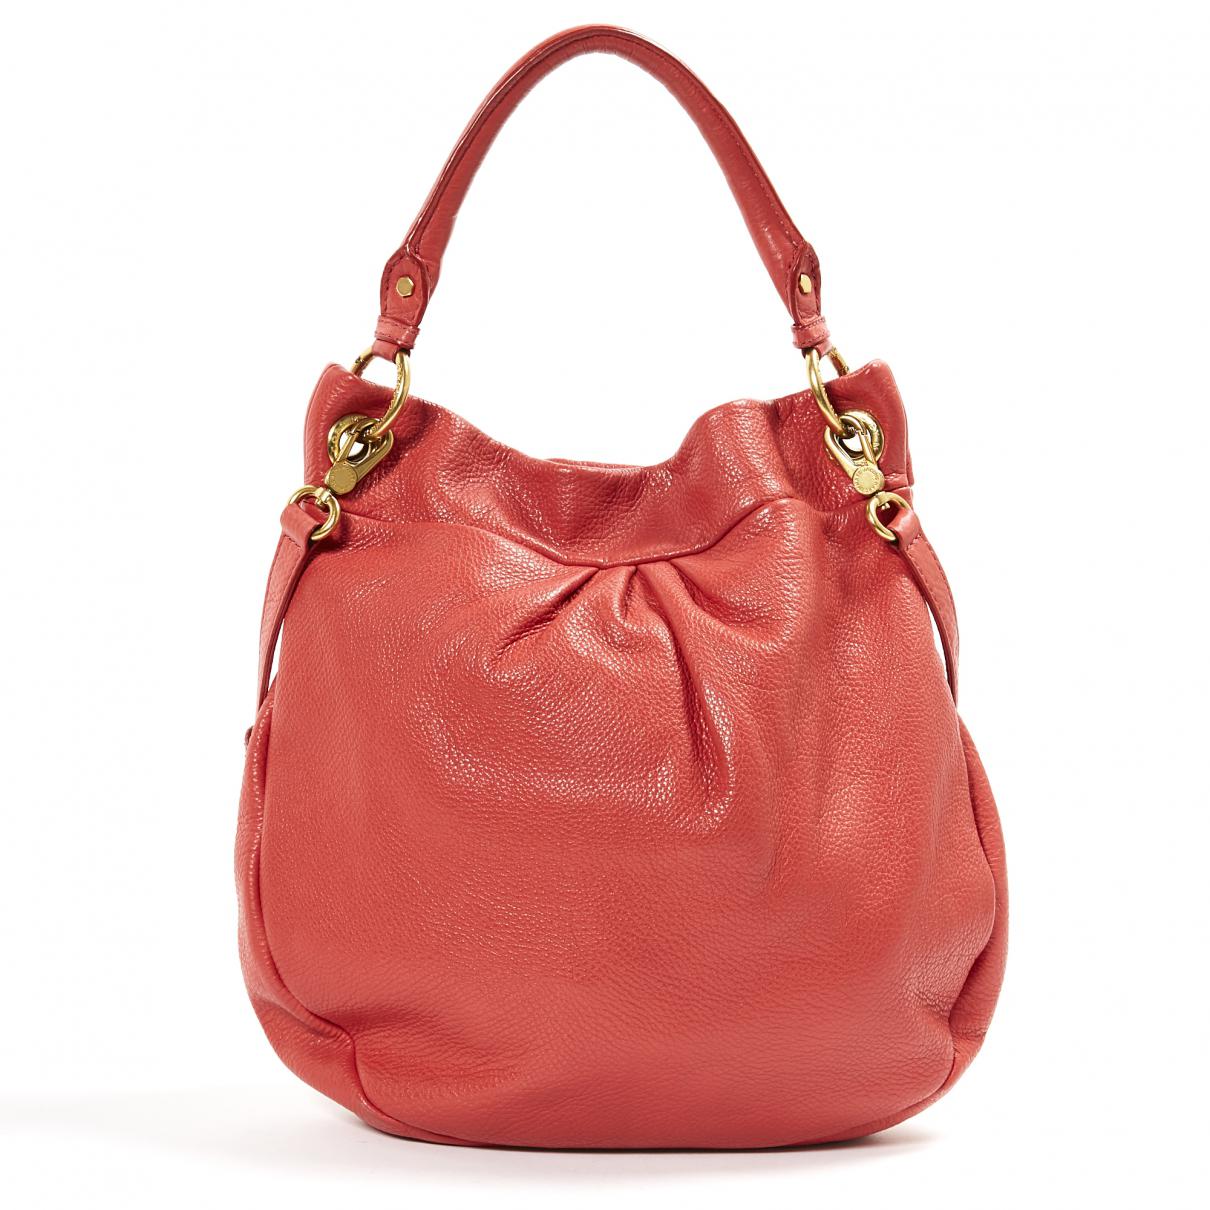 Marc By Marc Jacobs Leather Handbag in Red - Lyst